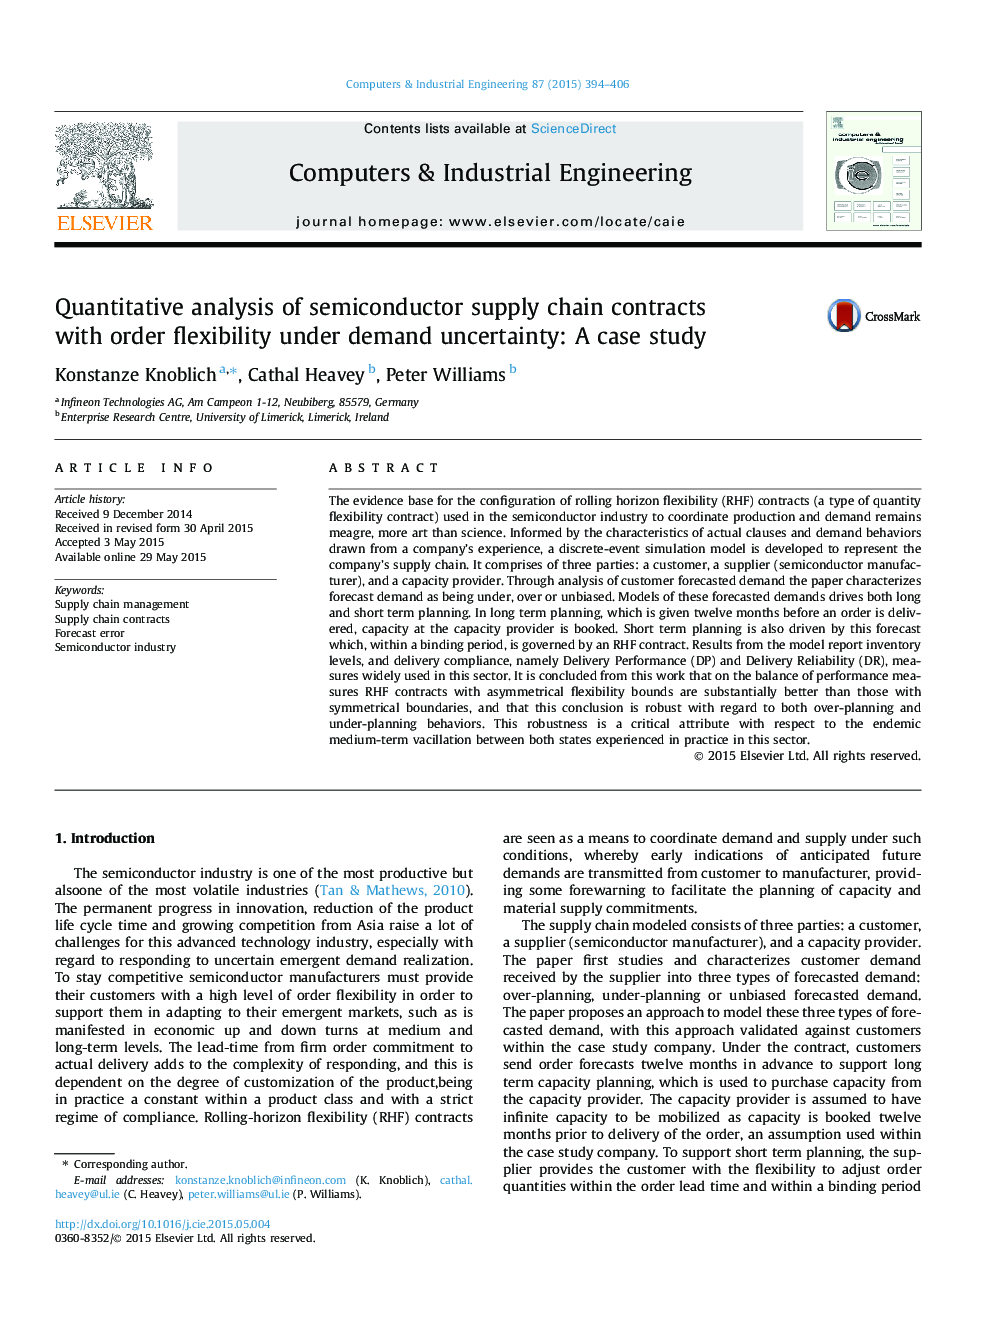 Quantitative analysis of semiconductor supply chain contracts with order flexibility under demand uncertainty: A case study